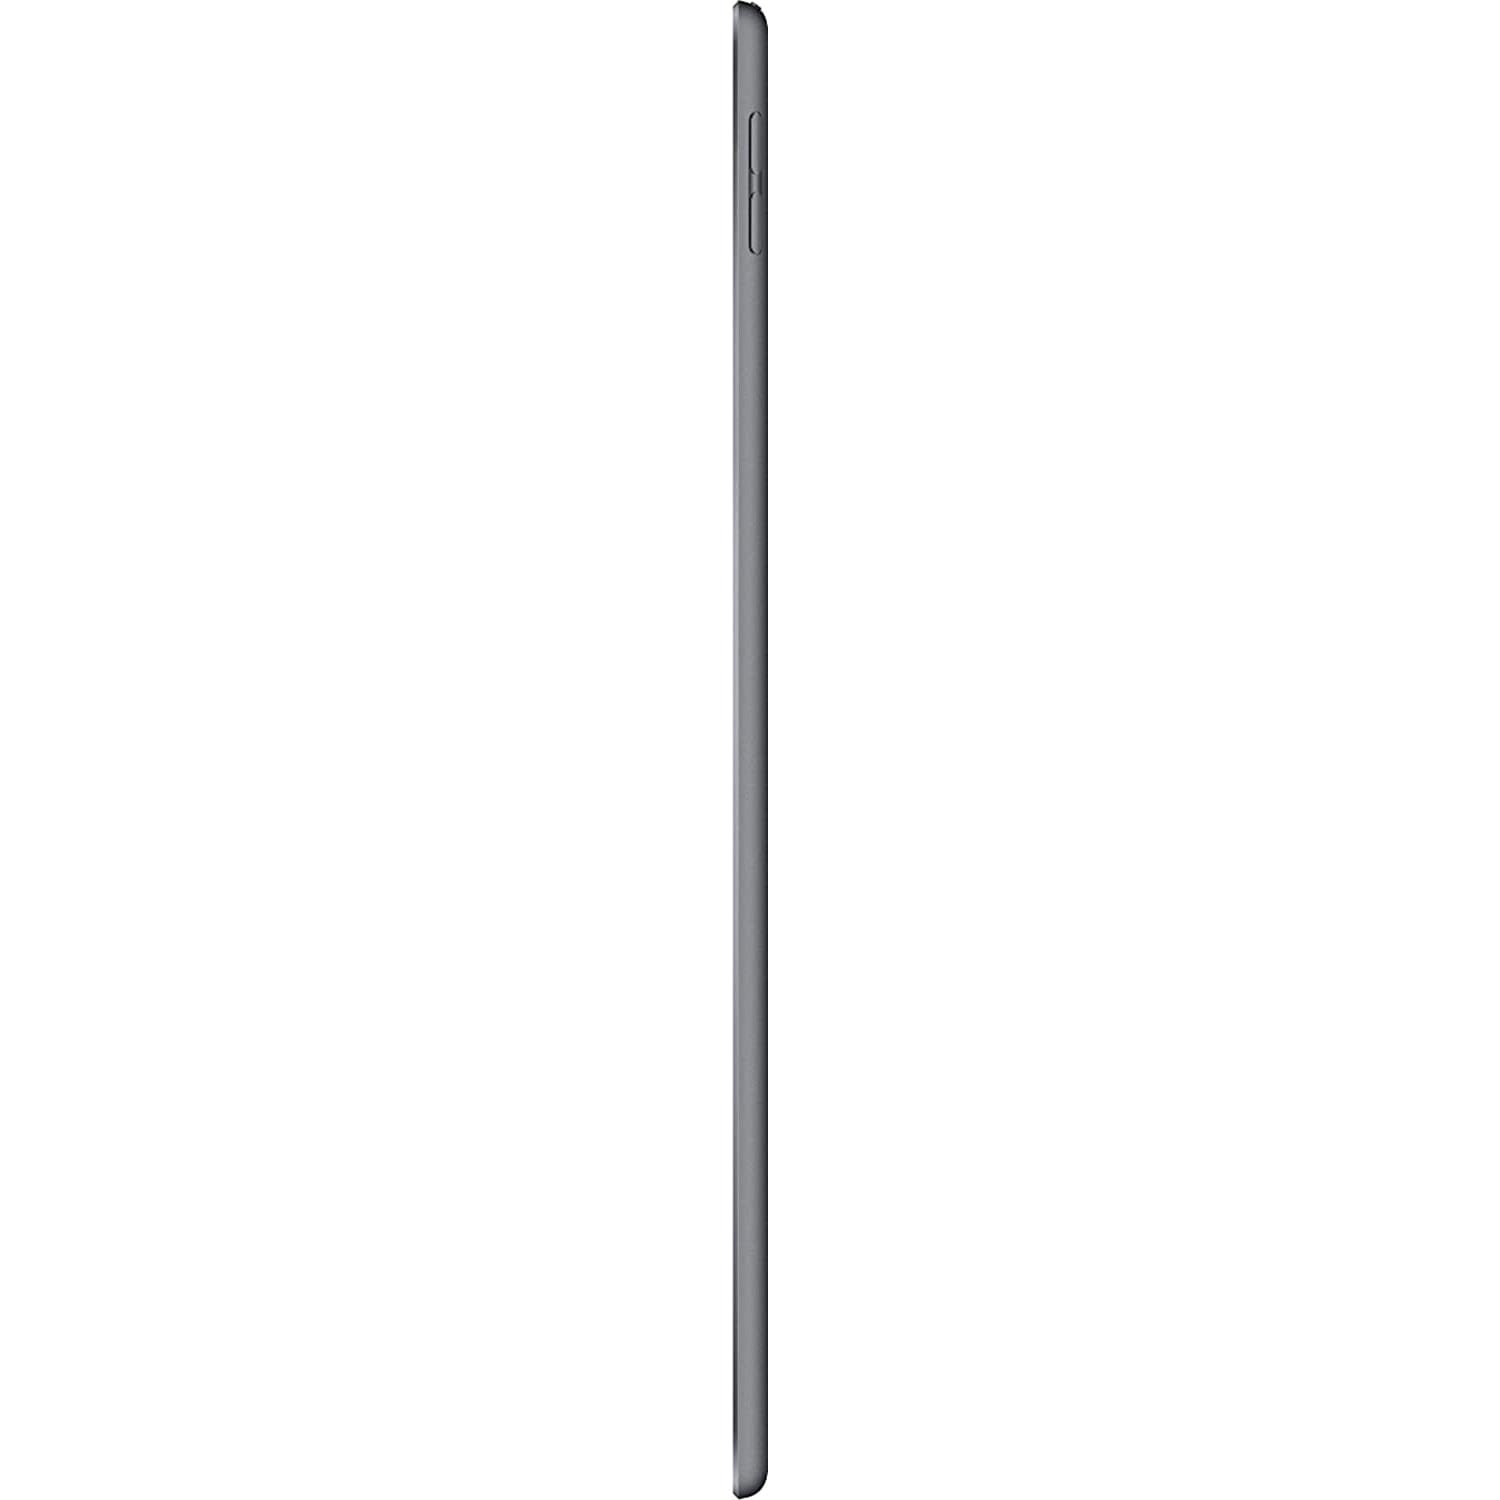  Apple iPad Air 10.5-inch (3rd Gen) Tablet A2152 (Wi-Fi Only) -  64GB / Space Gray (Renewed) : Electronics